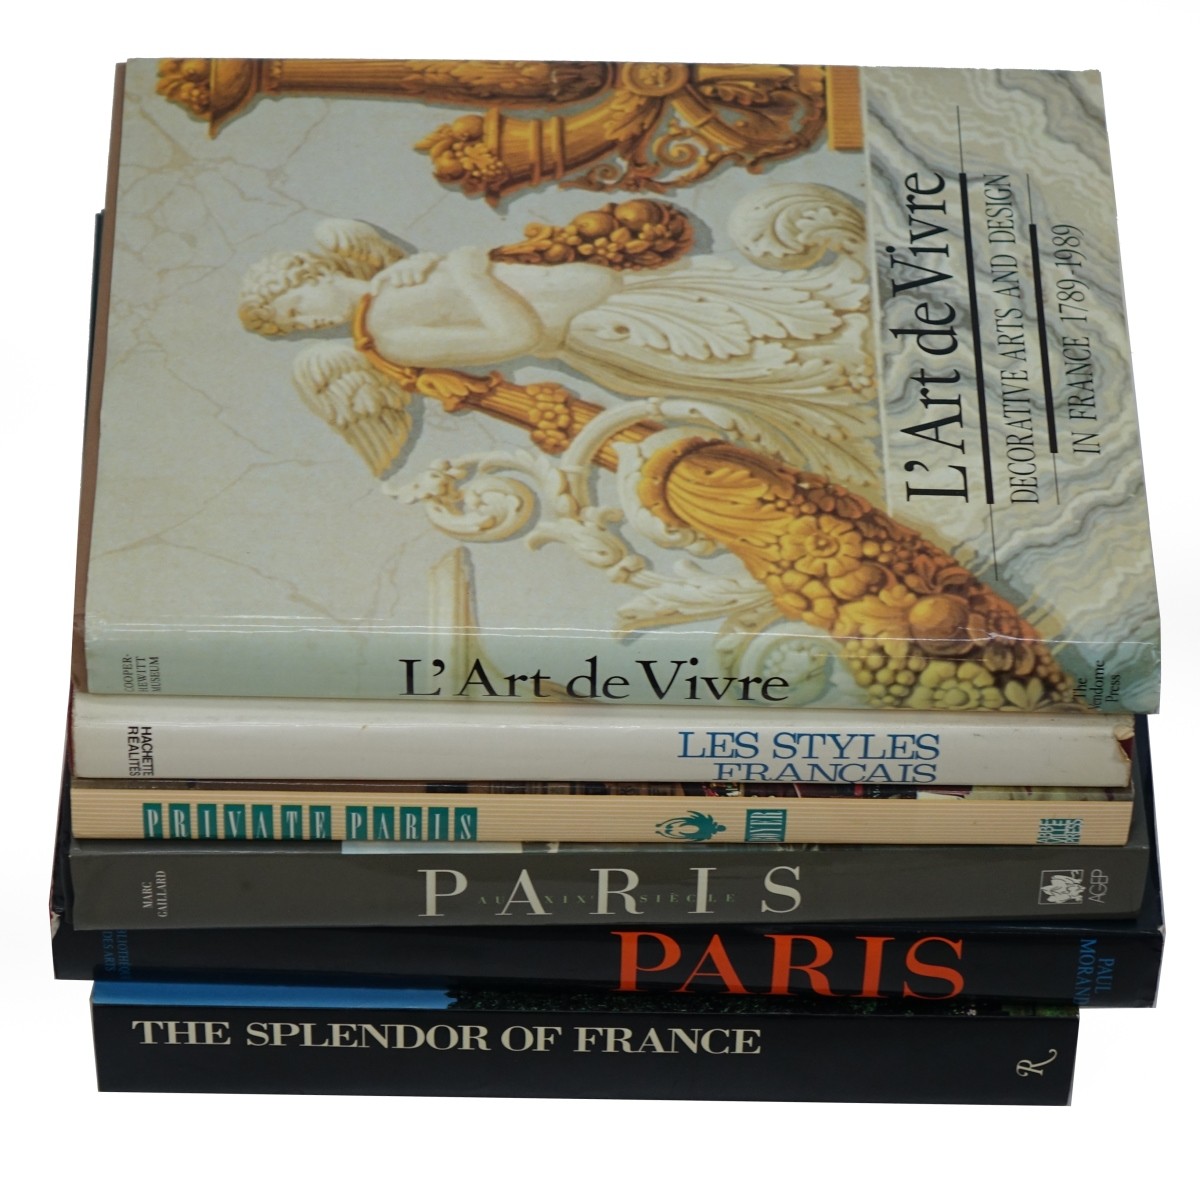 Five Volumes on French Art and Design